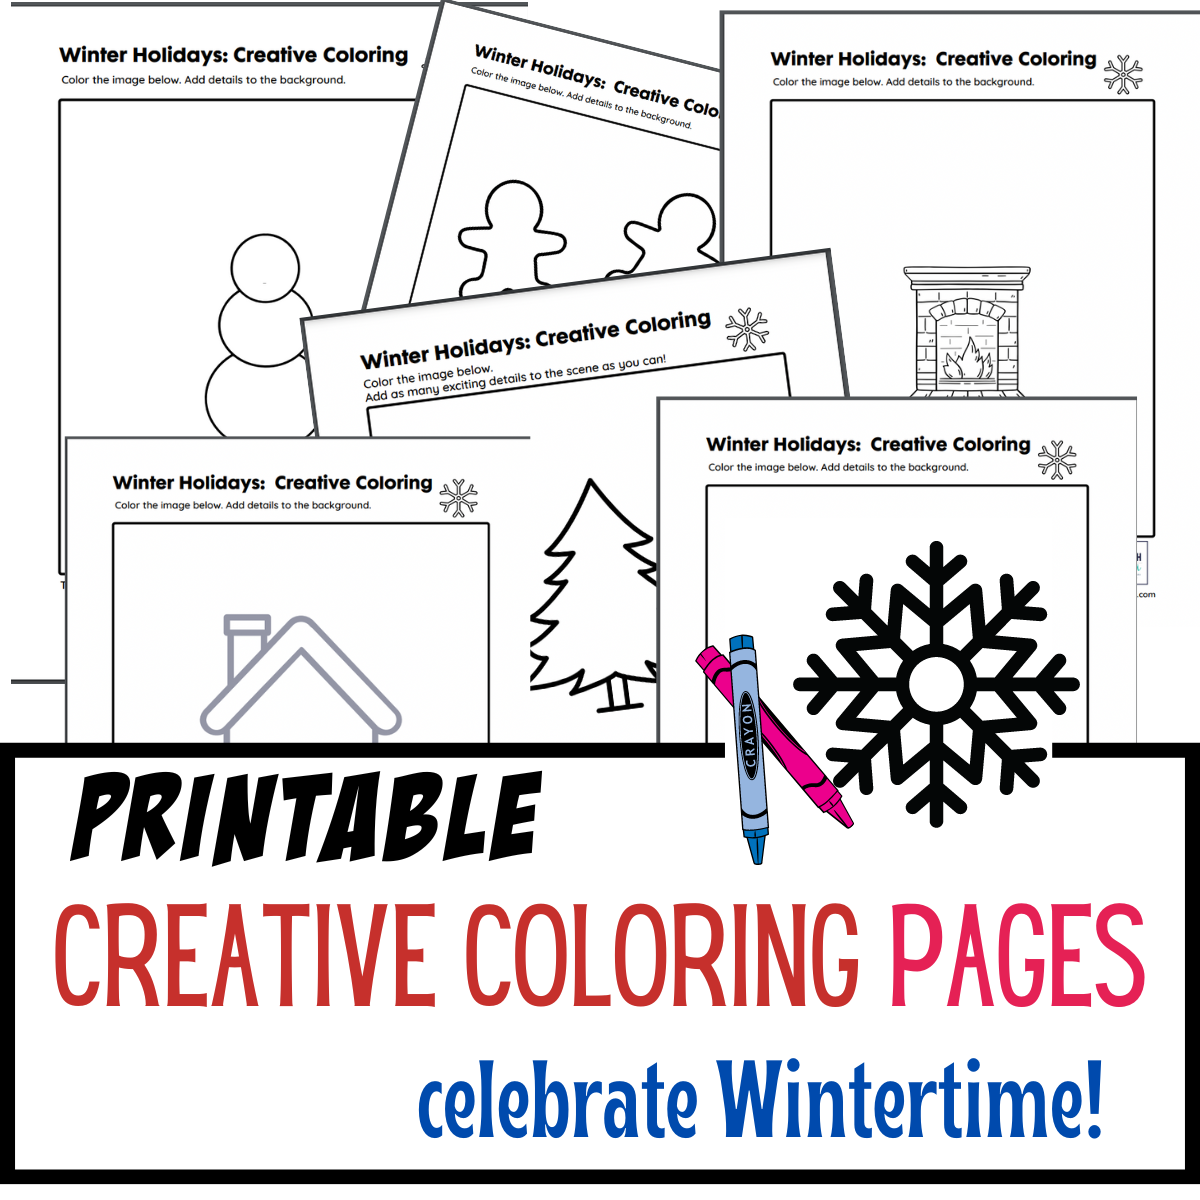 Winter holidays creative coloring pages